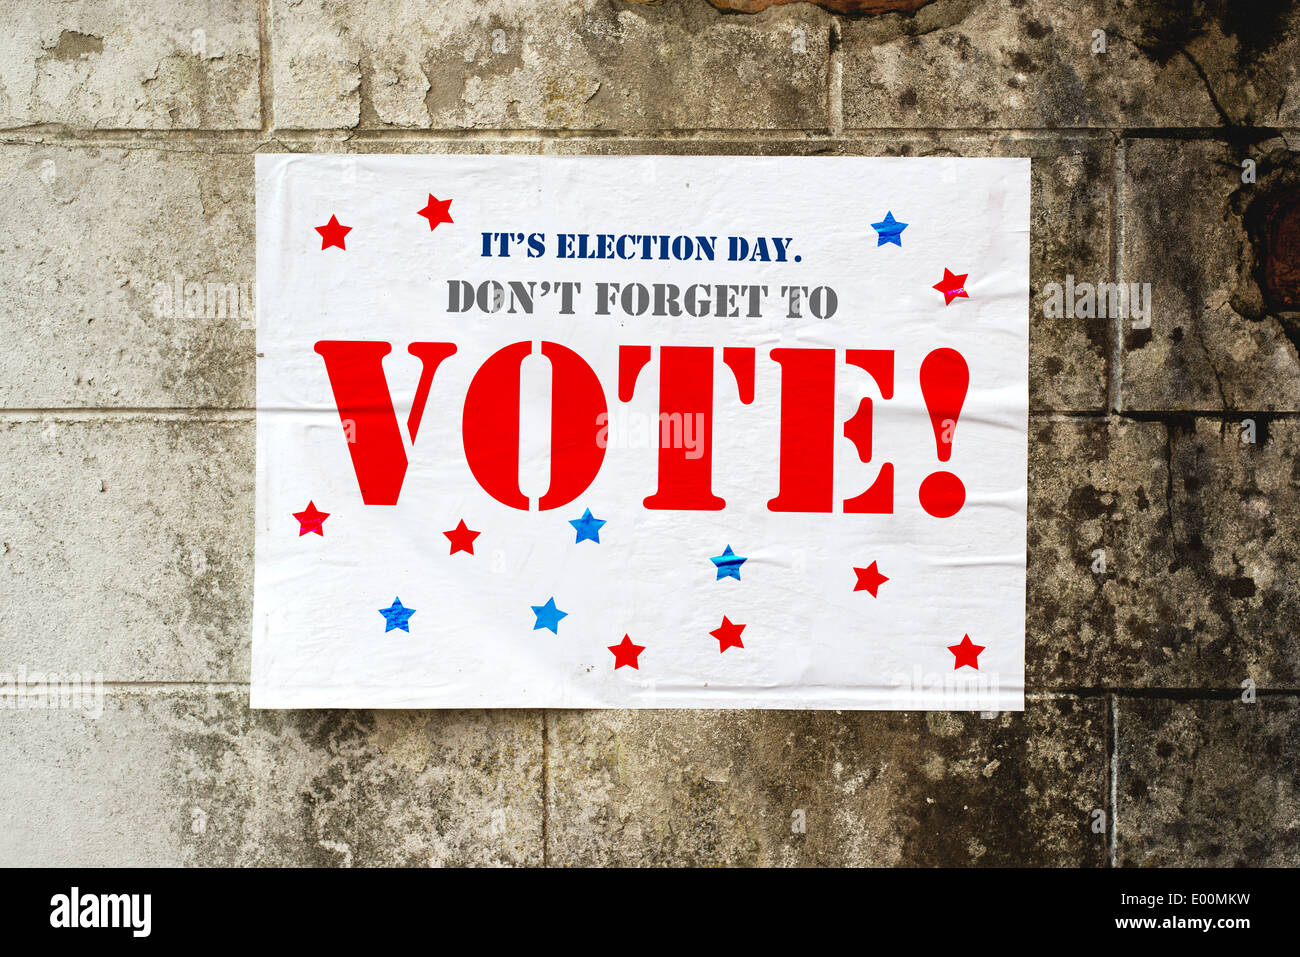 Election day poster reminding you to Vote on grunge street wall Stock Photo